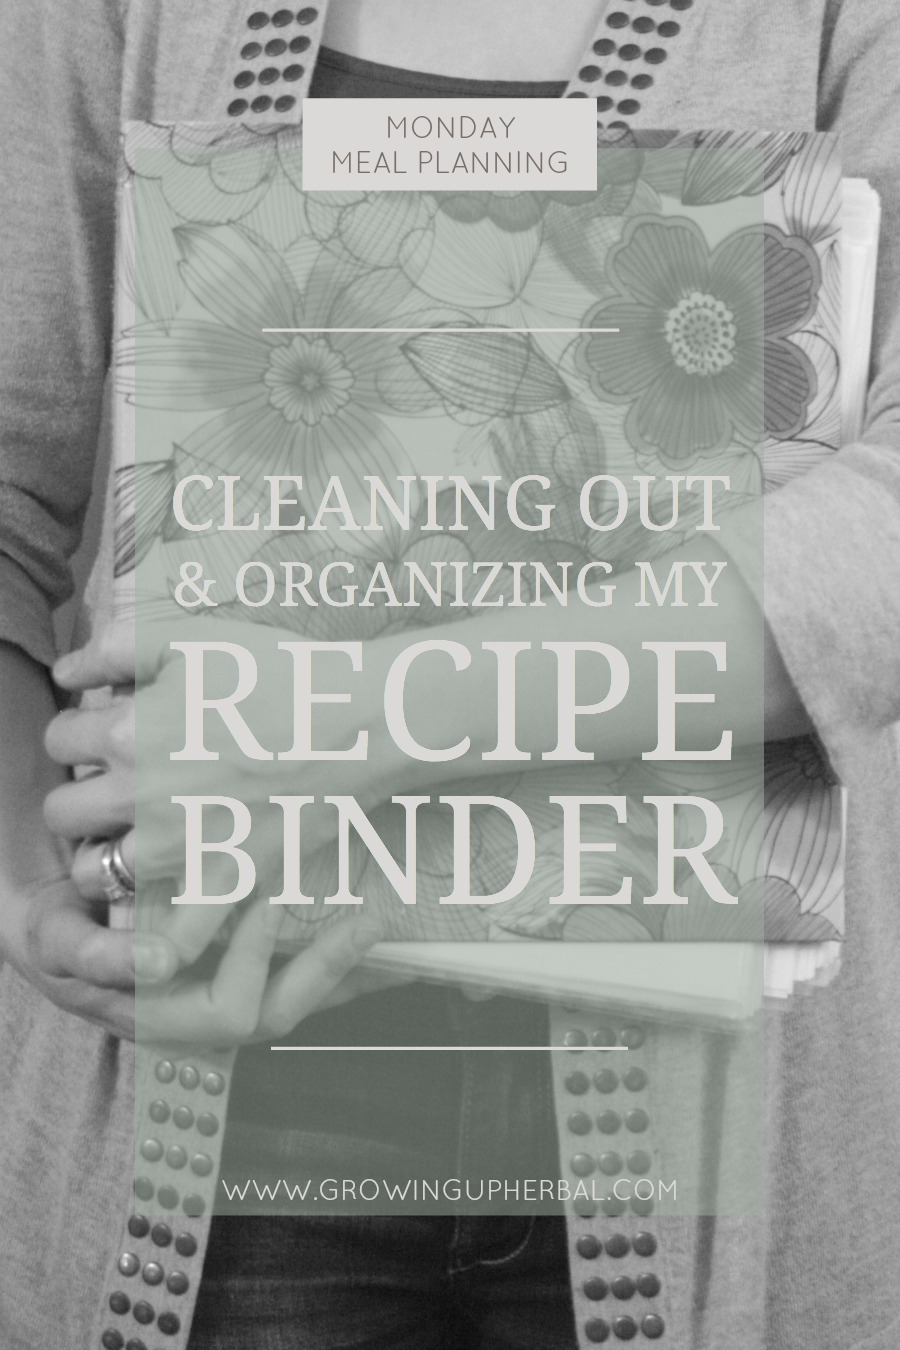 Meal Planning Monday: Cleaning Out & Organizing My Recipe Binder | Growing Up Herbal | Today I'm sharing how I recently organized my messy recipe binder!